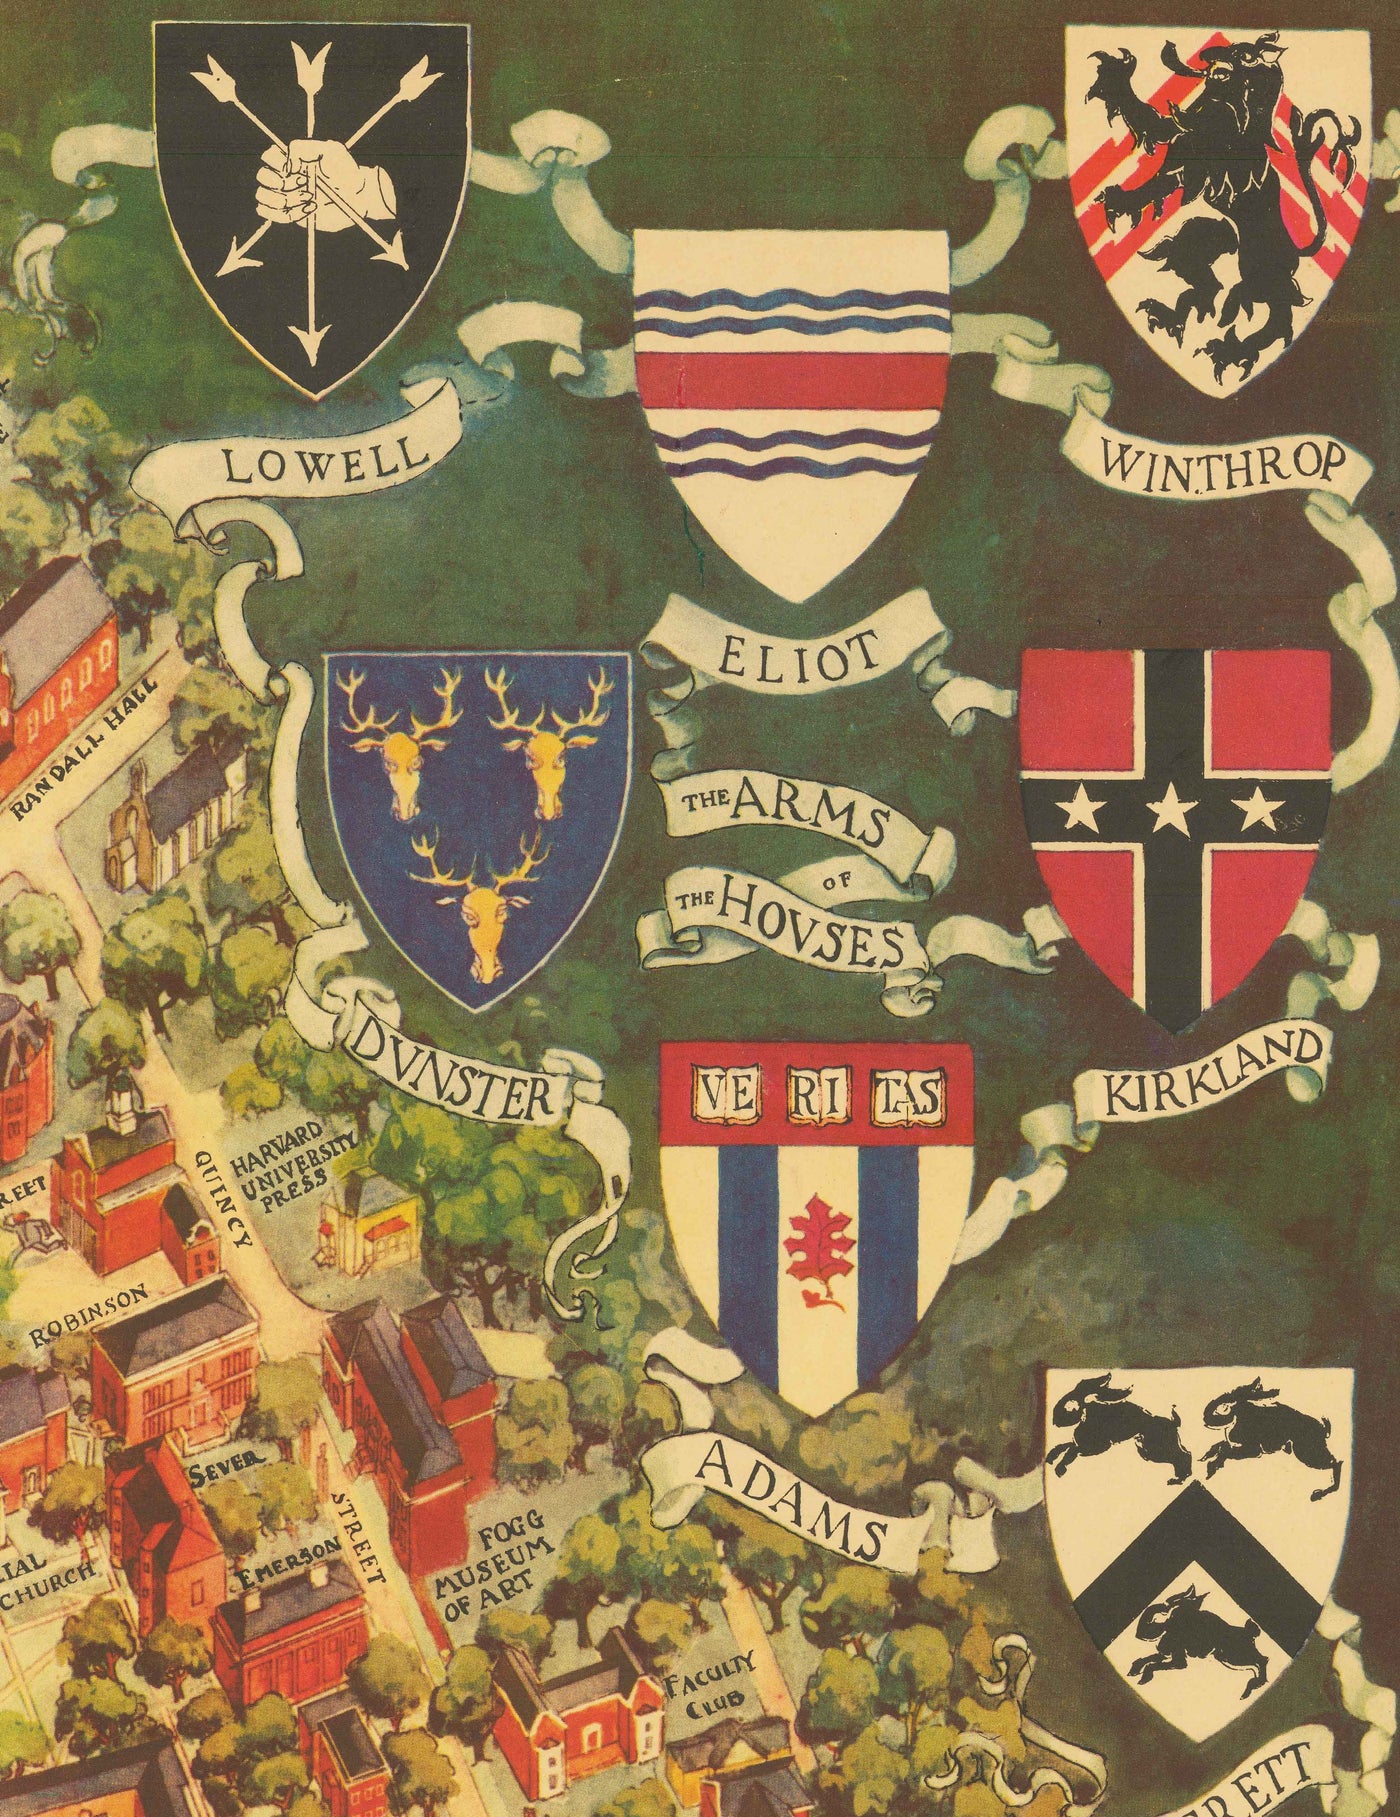 Old Map of Harvard University & Radcliffe, 1935 by Schruers - Campus, House Coat of Arms, Charles River